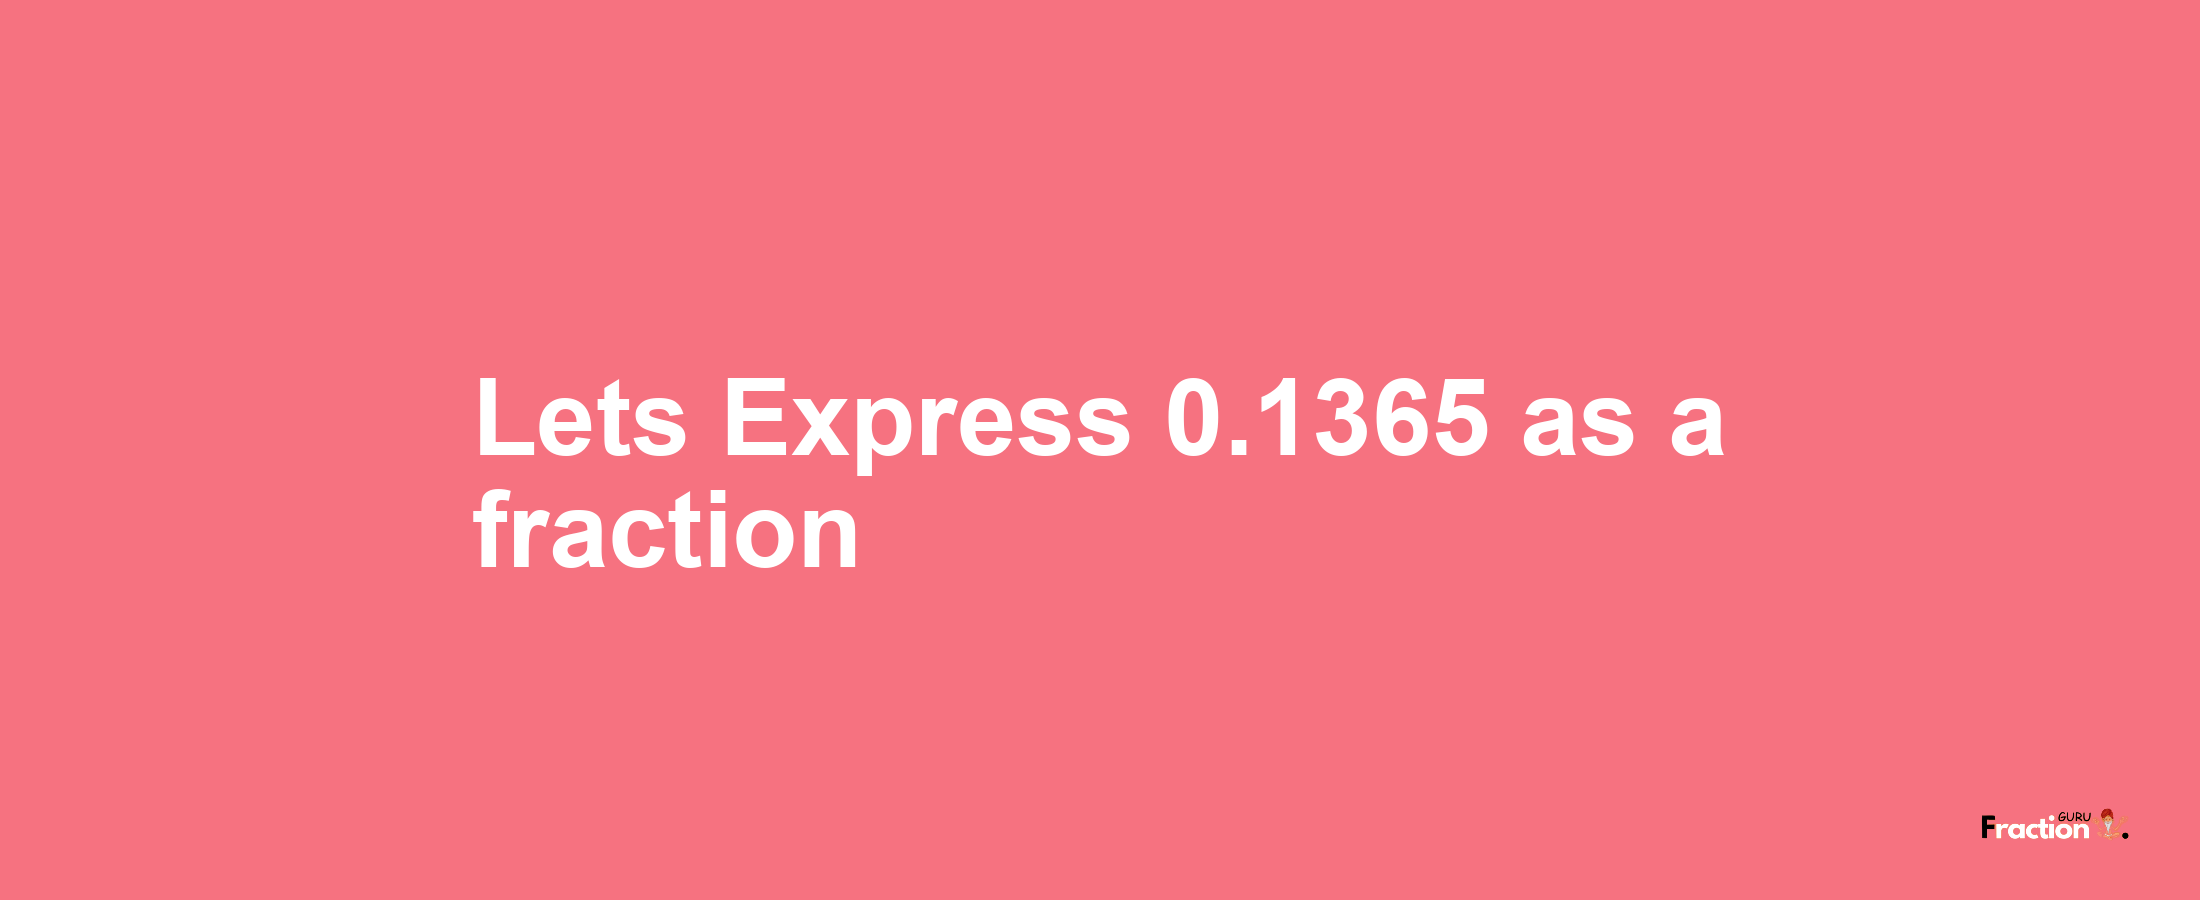 Lets Express 0.1365 as afraction